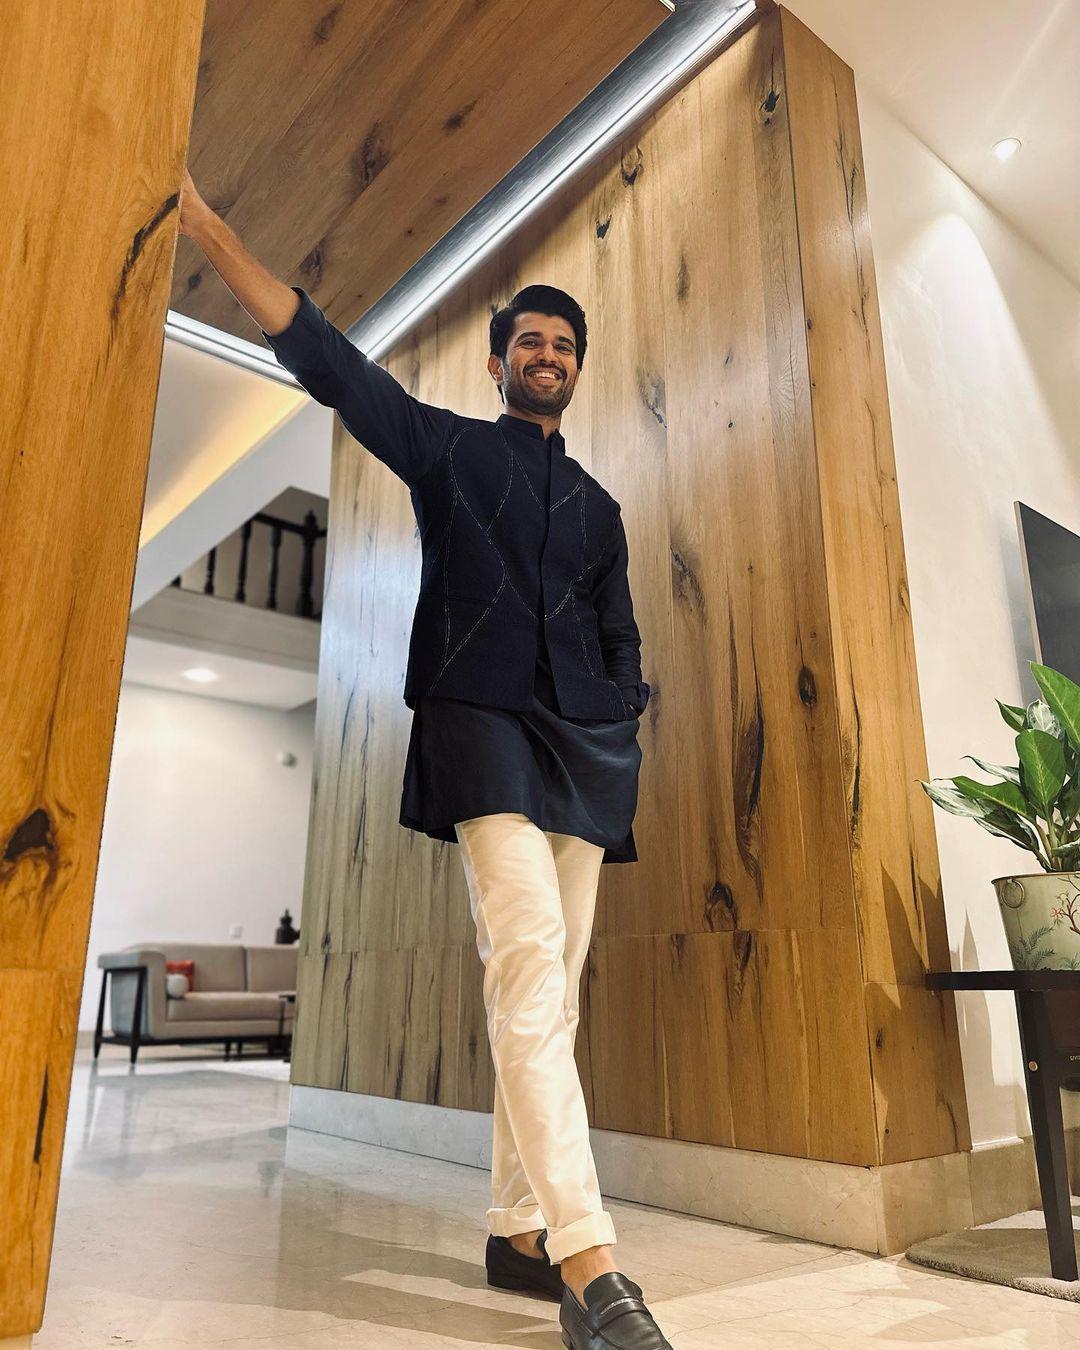 Vijay Deverakonda is the new address of style and charm. In a black kurta paired with white pyjama and matching jacket, he commands a style that leaves everyone in awe of it